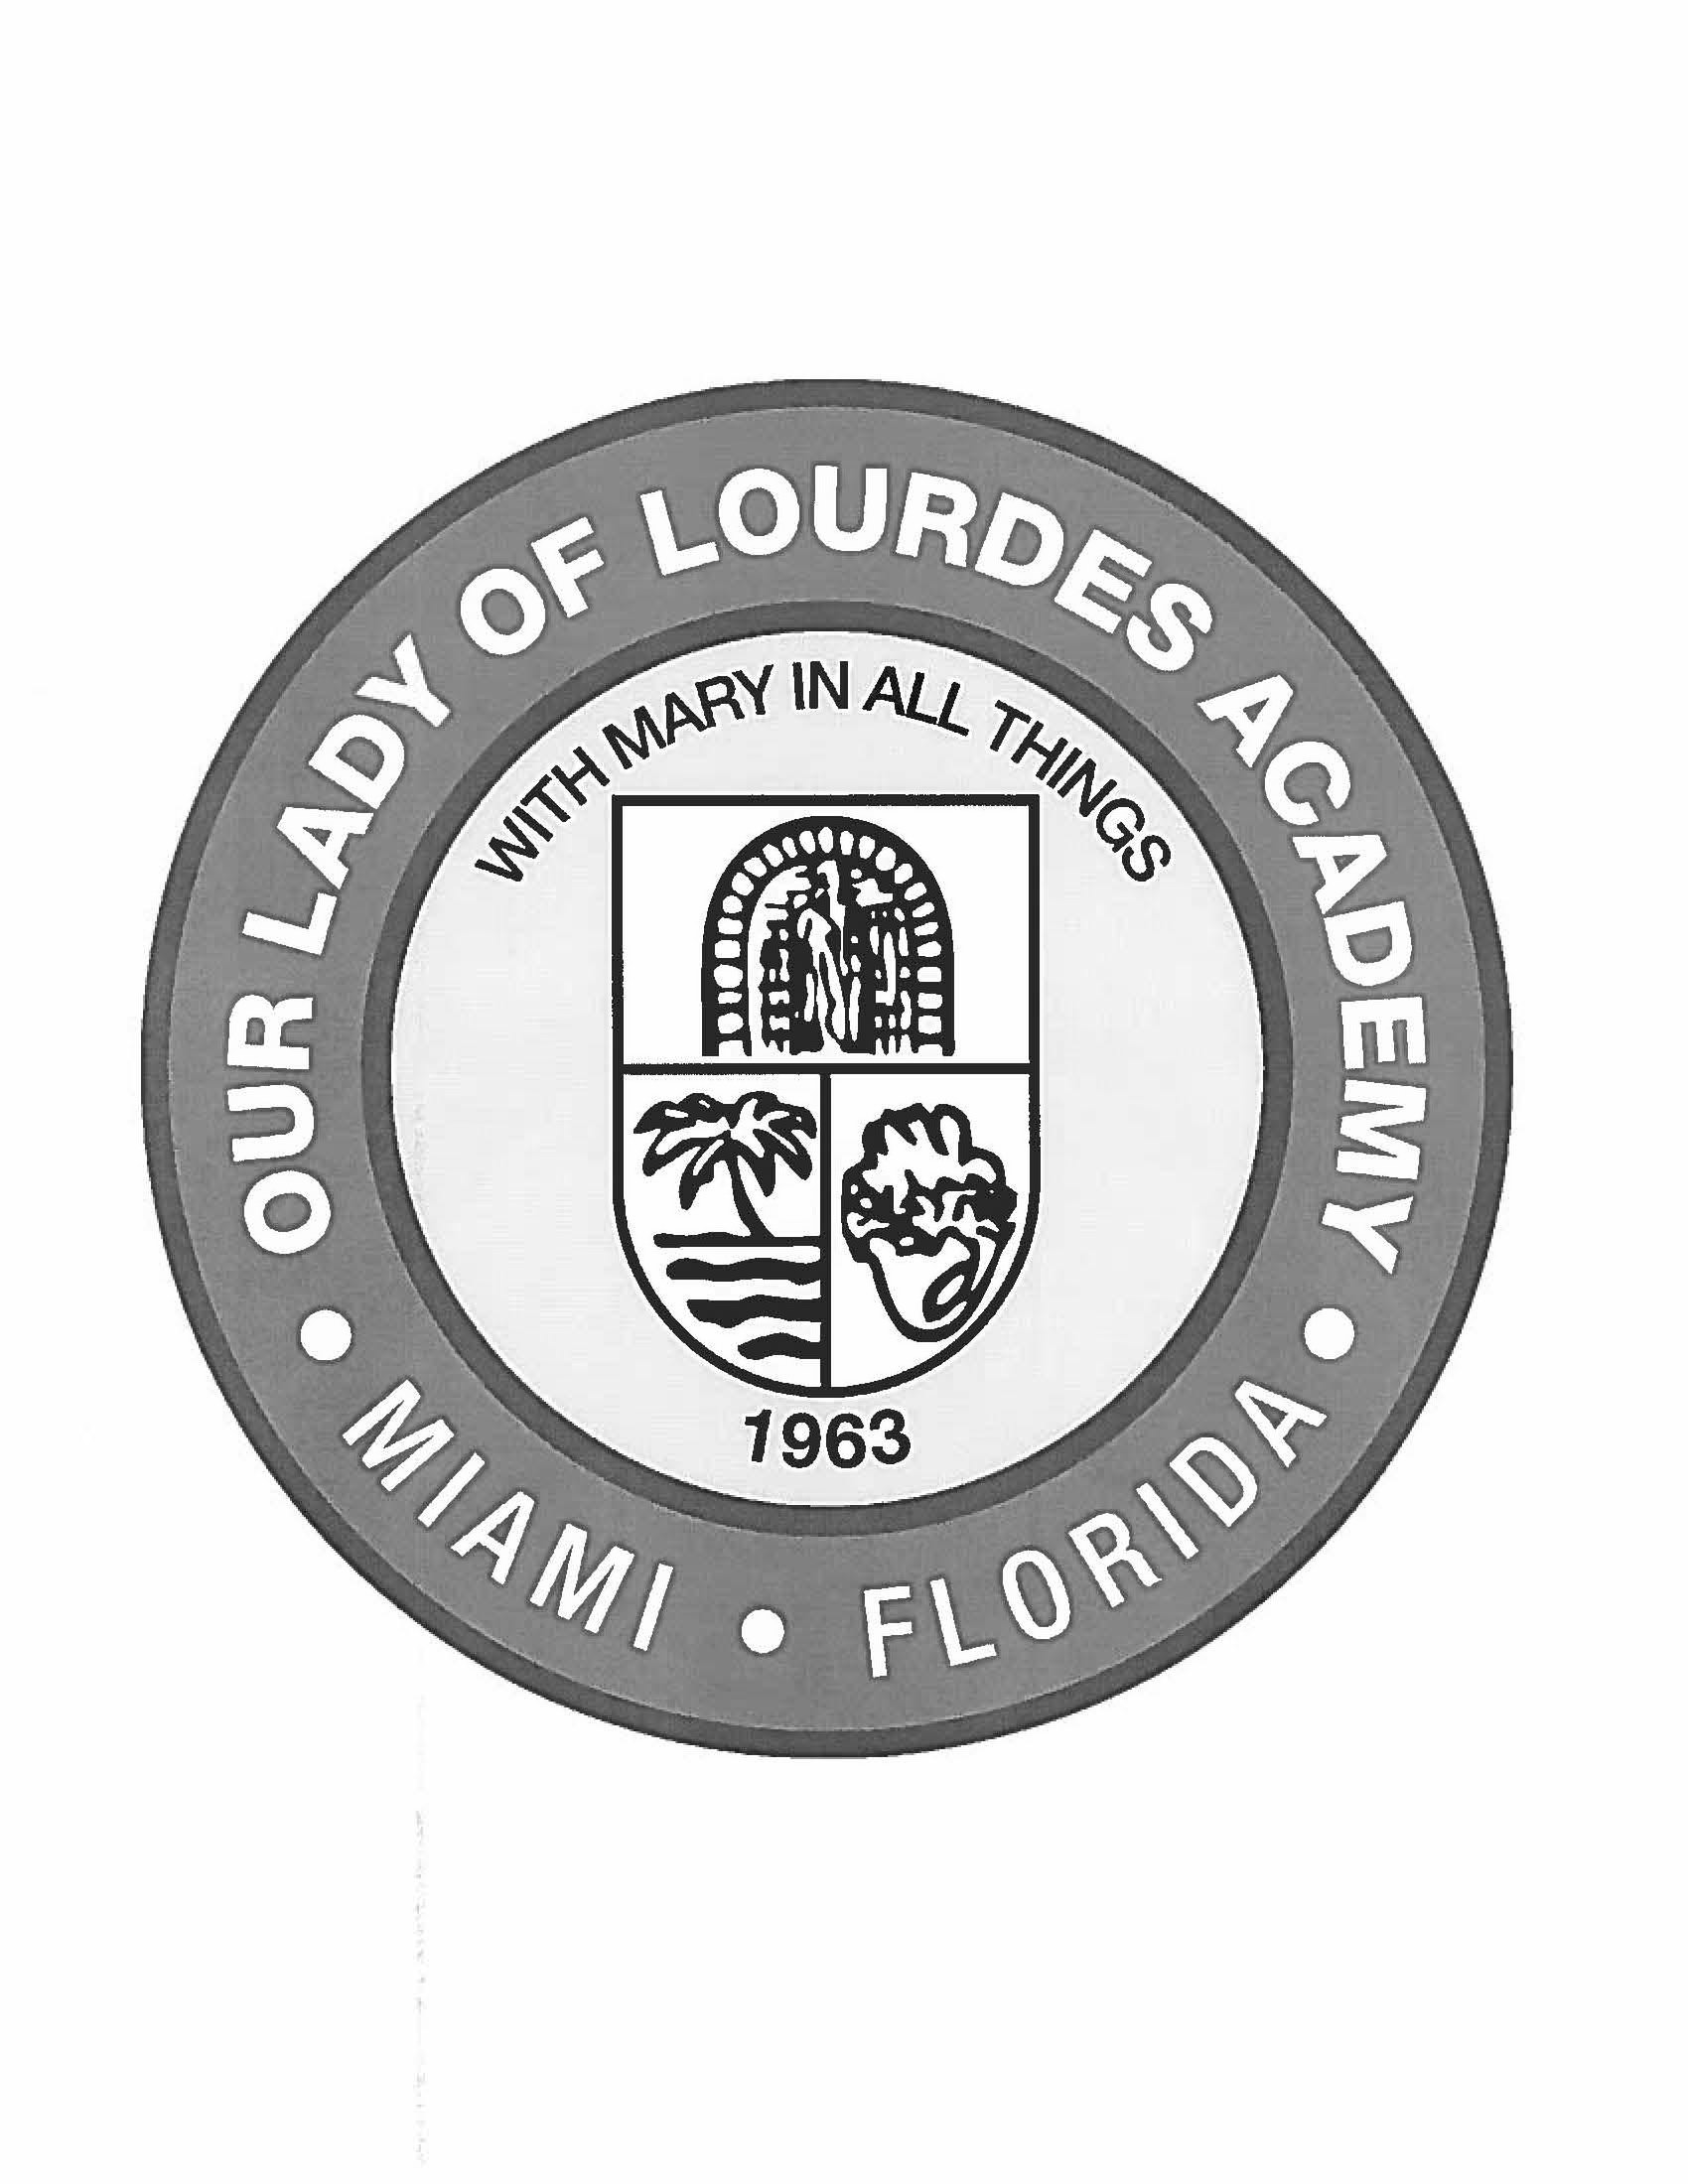 Trademark Logo OUR LADY OF LOURDES ACADEMY · MIAMI · FLORIDA · WITH MARY IN ALL THINGS 1963